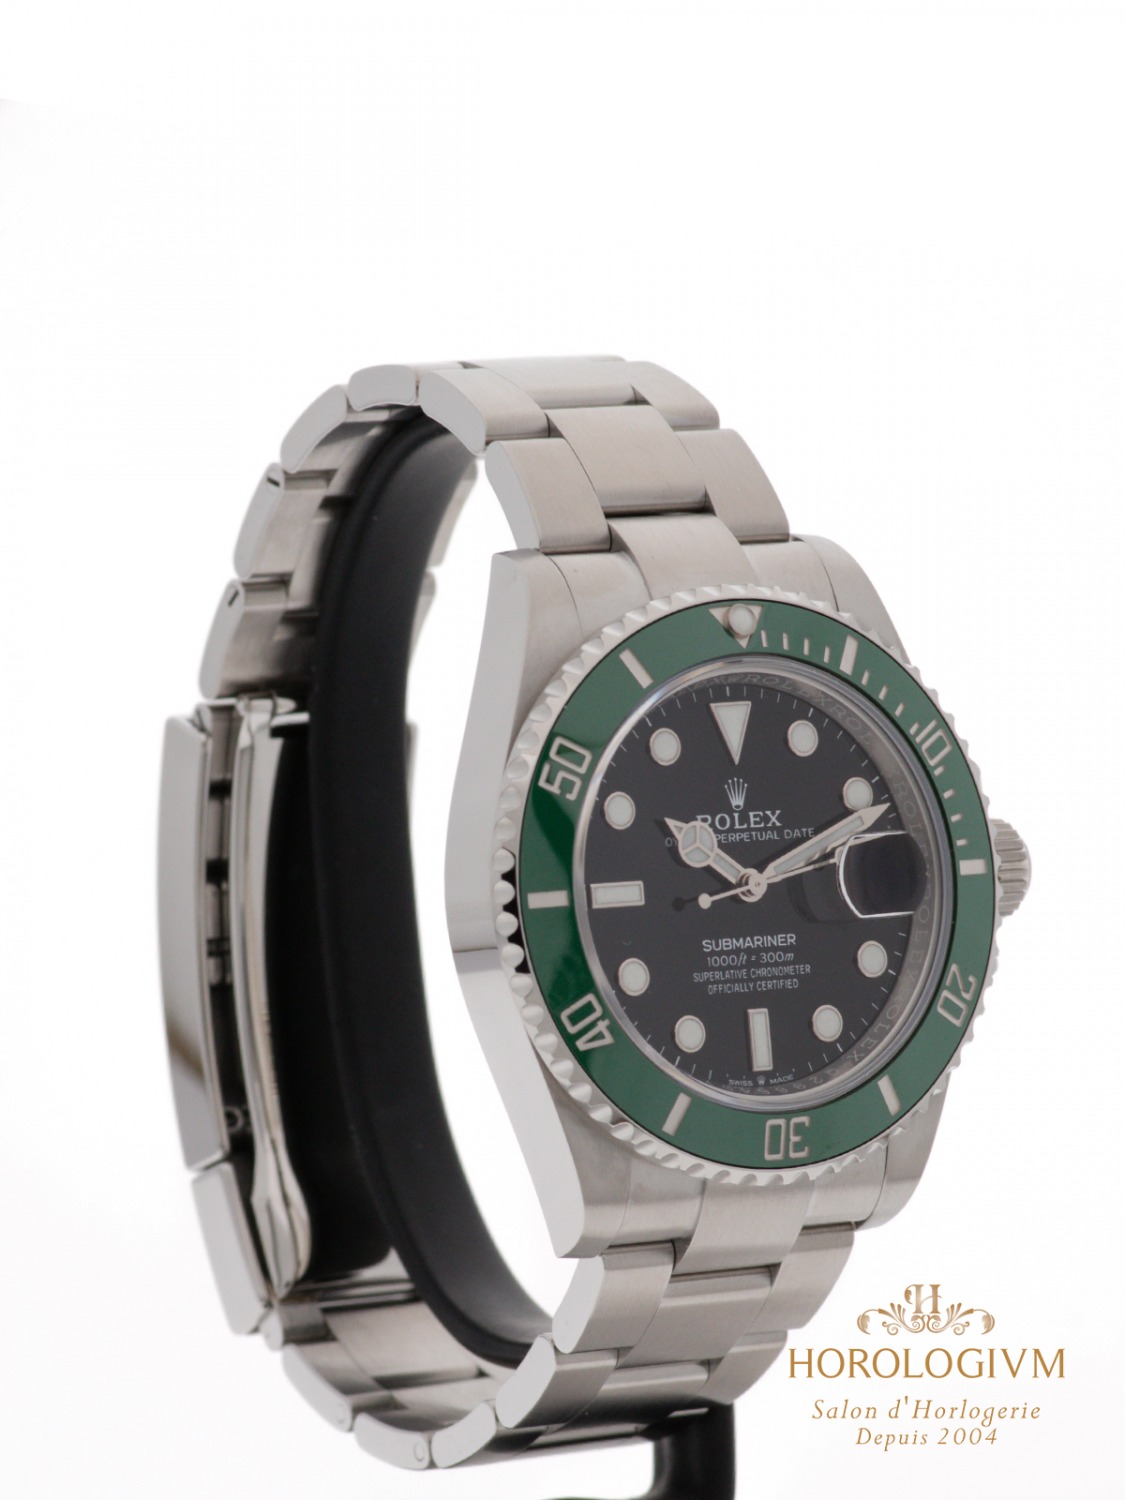 Rolex Oyster Perpetual Date Submariner 41MM Ref. 126610LV watch, silver (case) and silver & green cerachrom / ceramic (bezel)